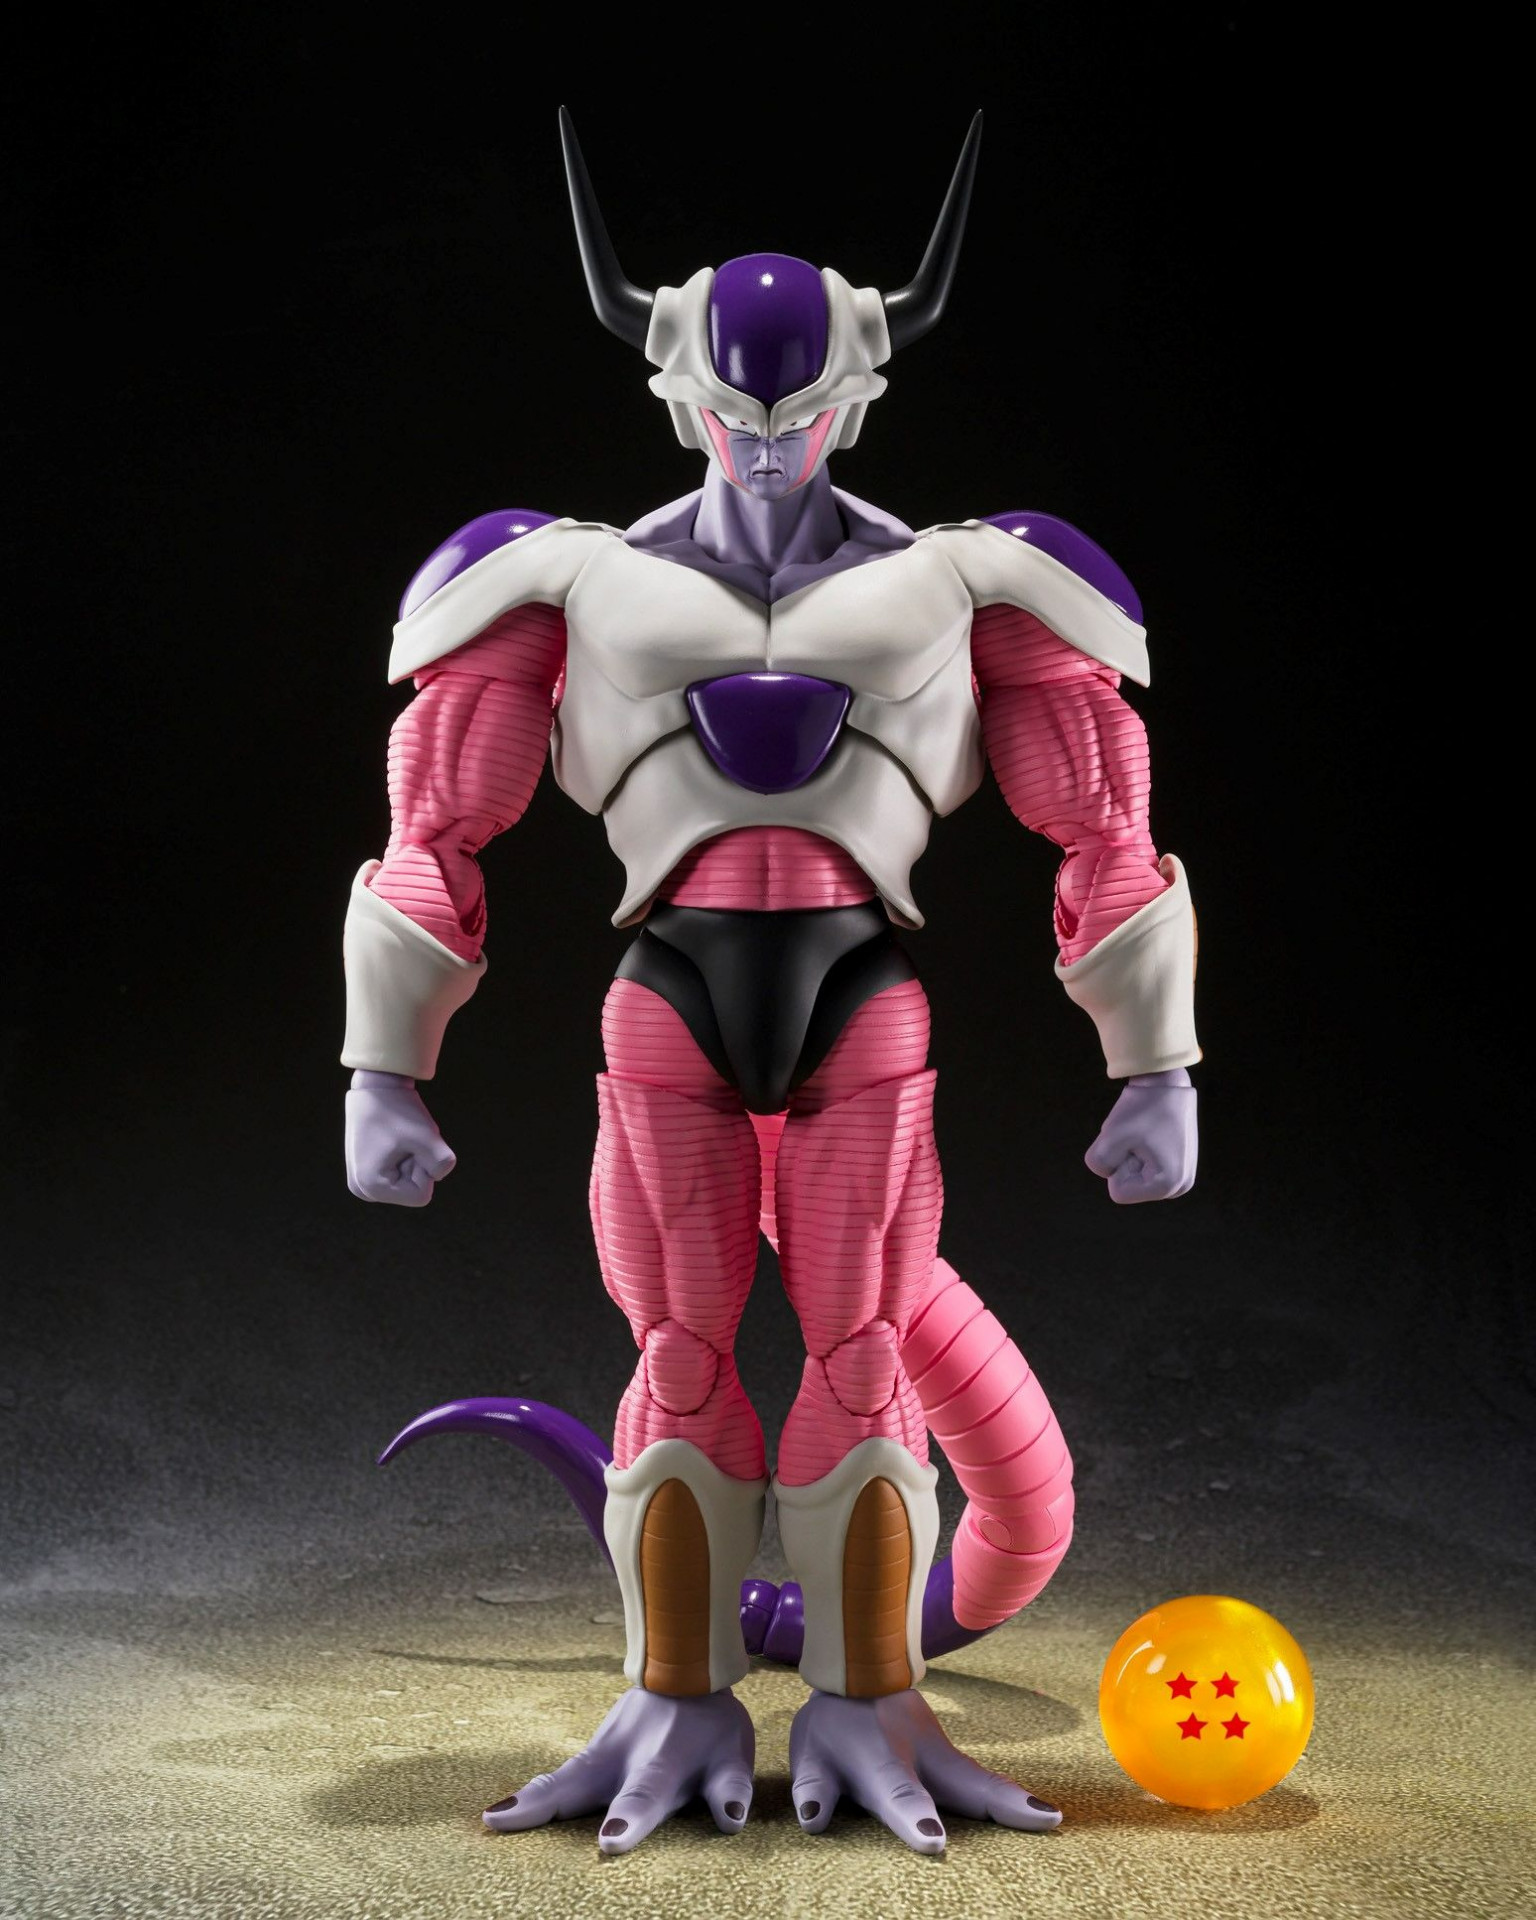 Second Form Frieza Invades the S.H.Figuarts Series!